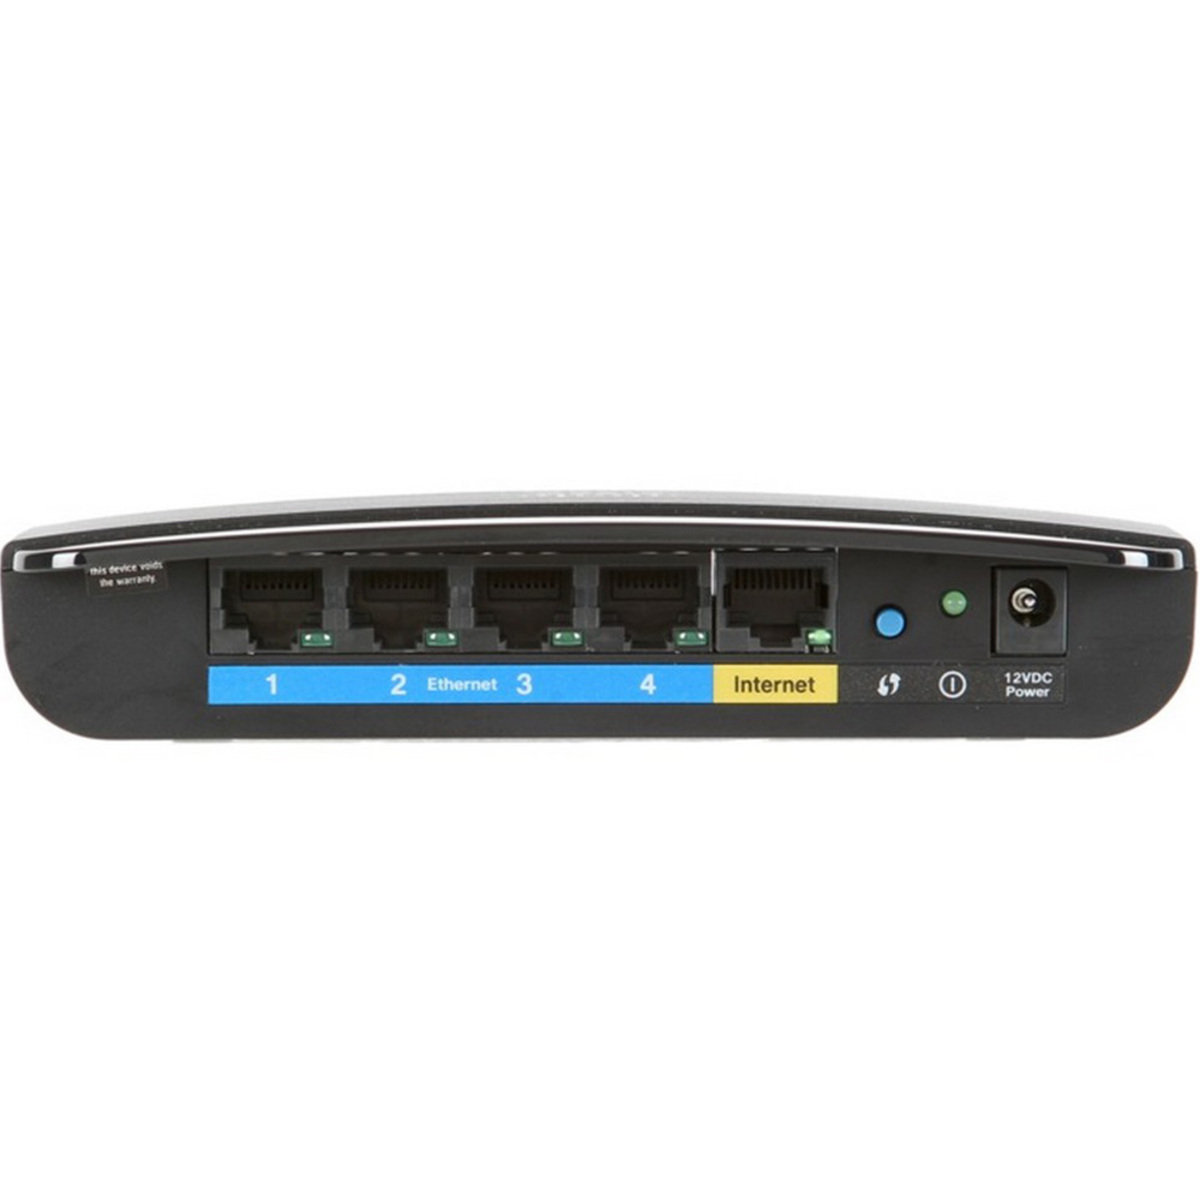 Linksys N300 Wireless Router E1200